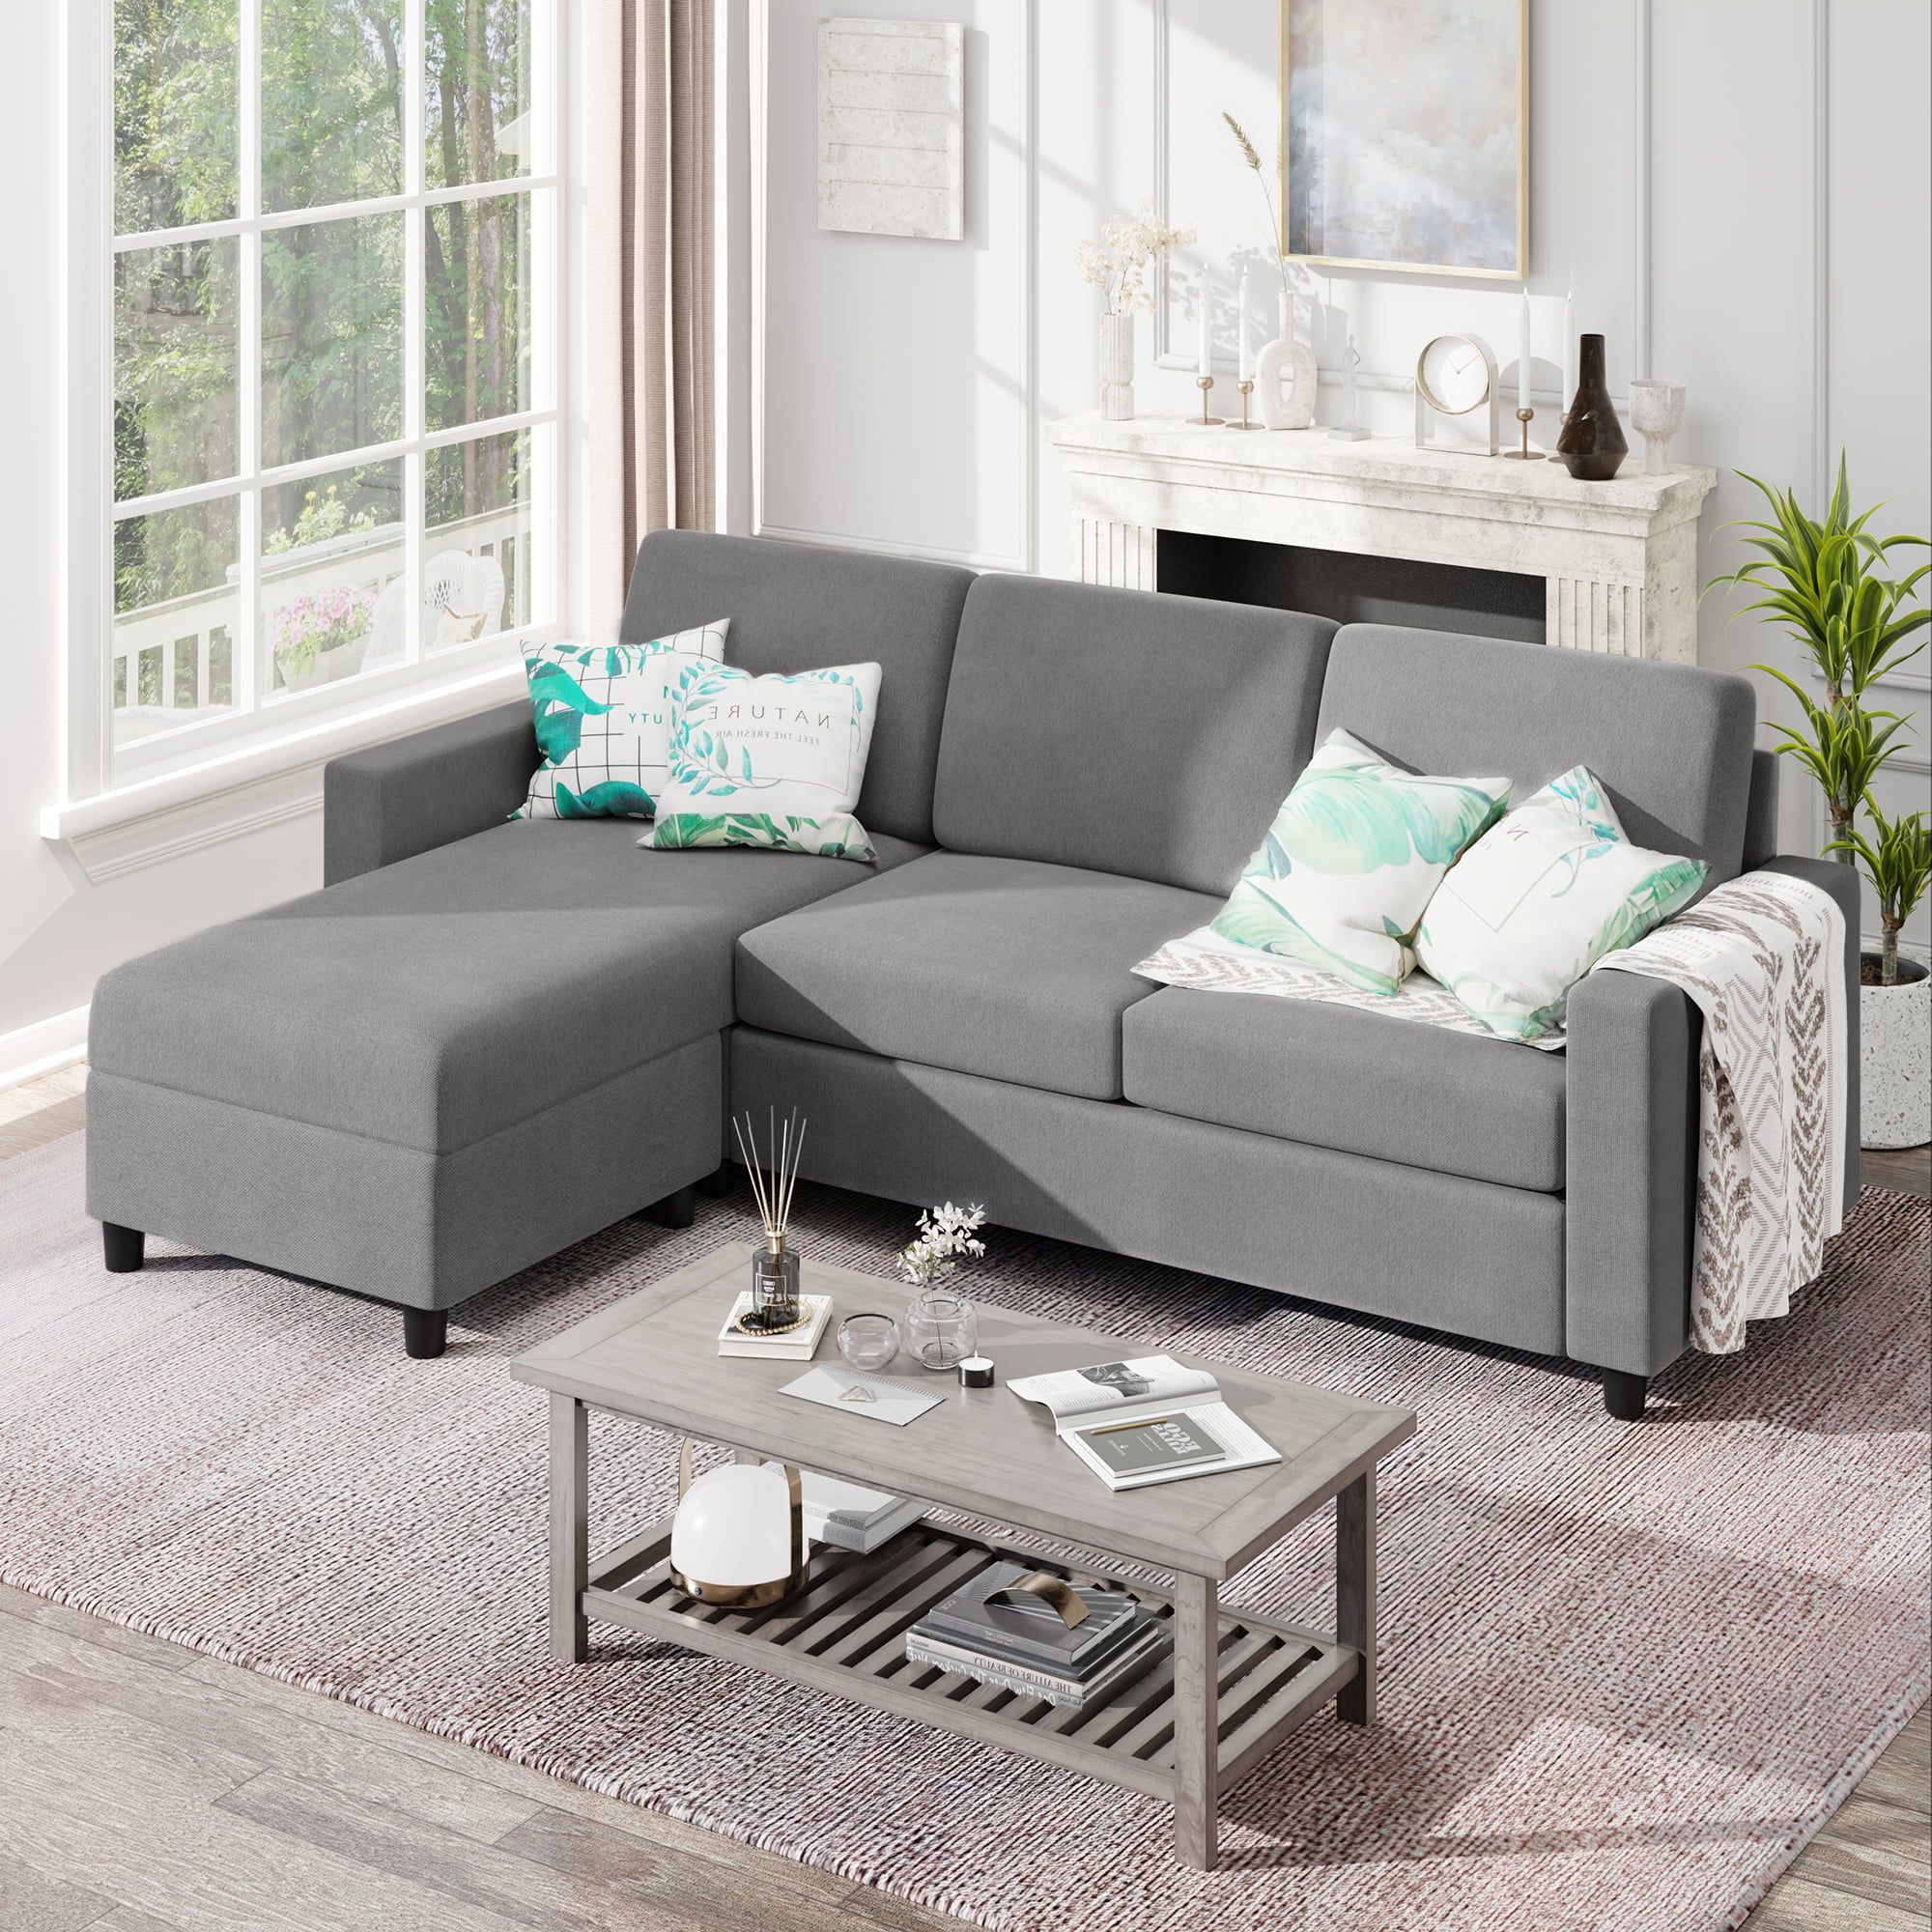 Sobaniilo Convertible Sectional Sofa Couch, Modern Linen Fabric L Shaped  3 Seat Sofa Sectional With Reversible Chaise For Small Space (dark Gray) –  Walmart With Regard To Sectional Couches For Living Room (Gallery 13 of 20)